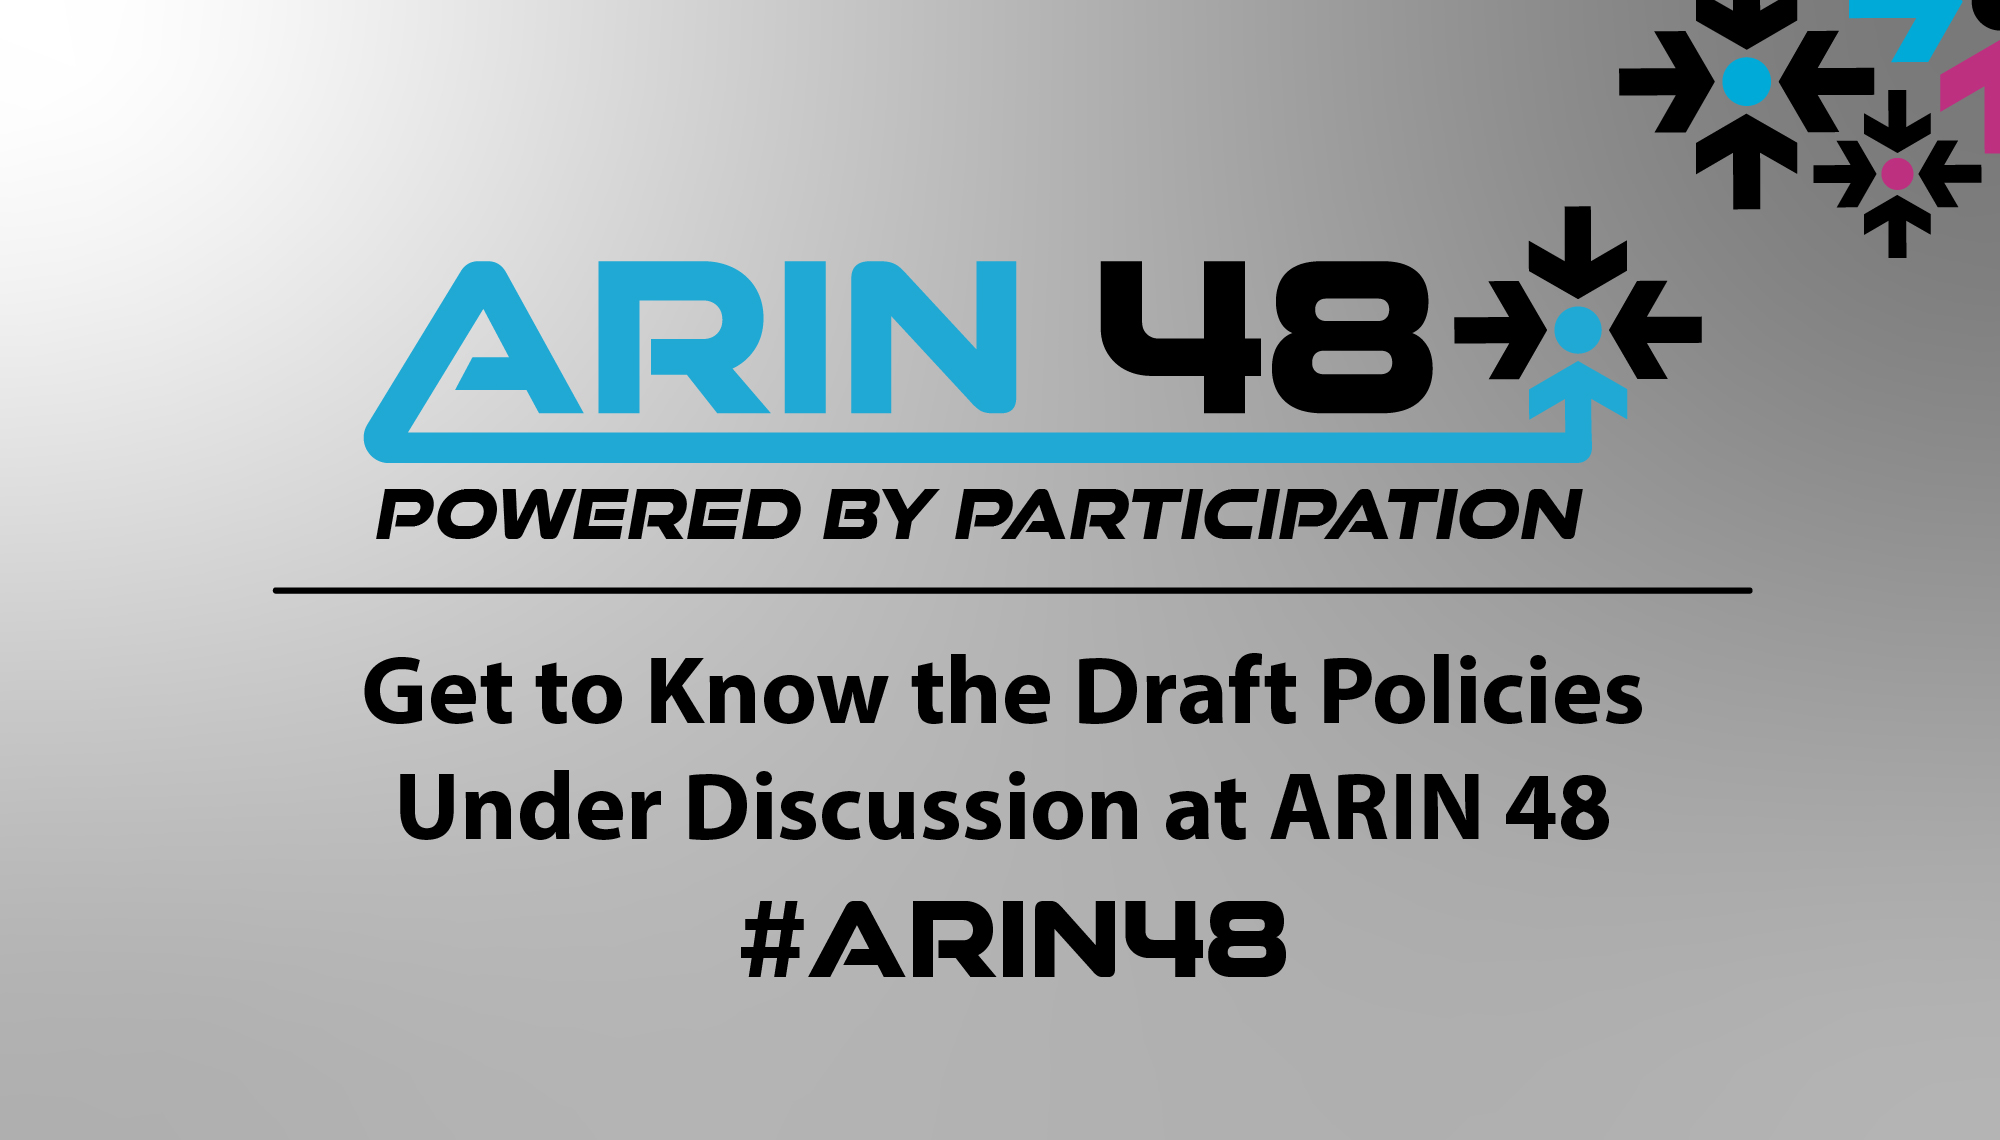 Draft Policies Under Discussion at ARIN 48